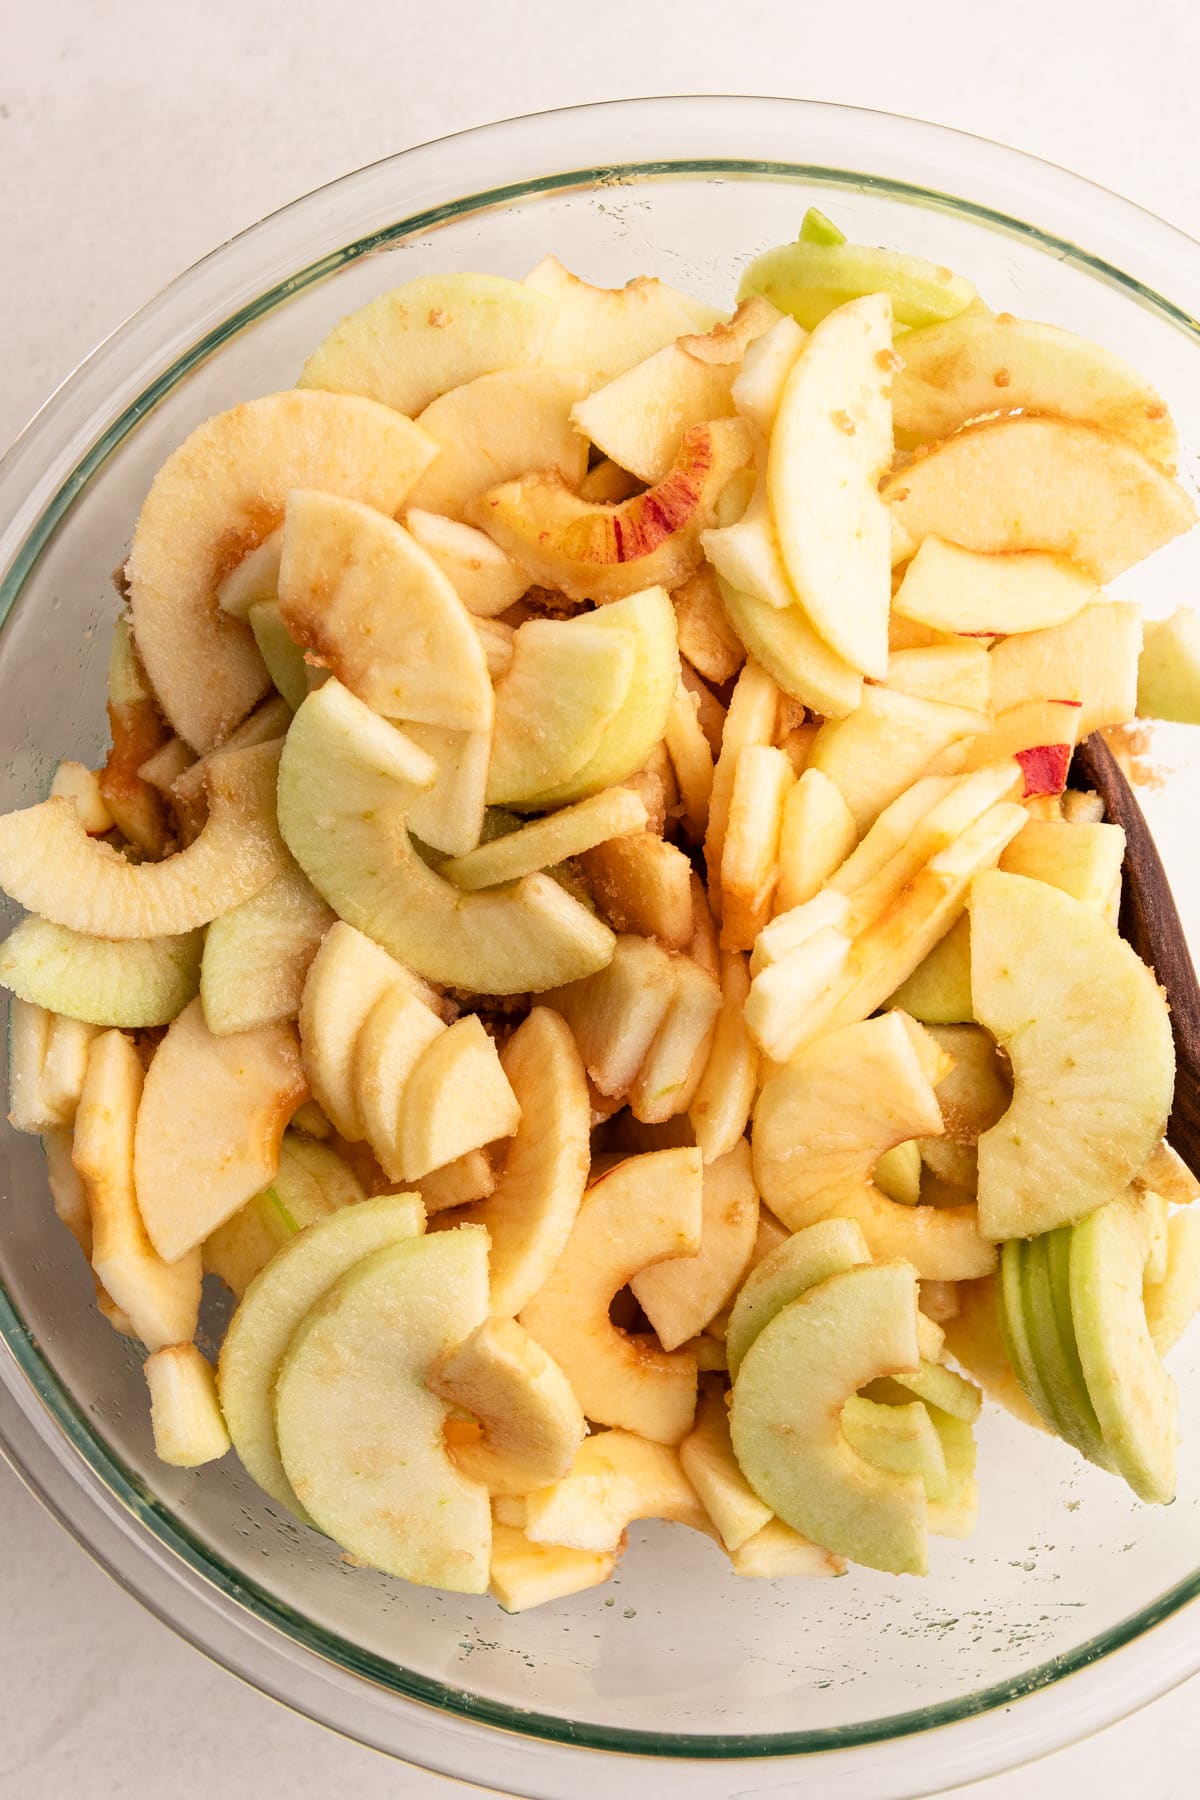 Apples in a bowl for apple pie.